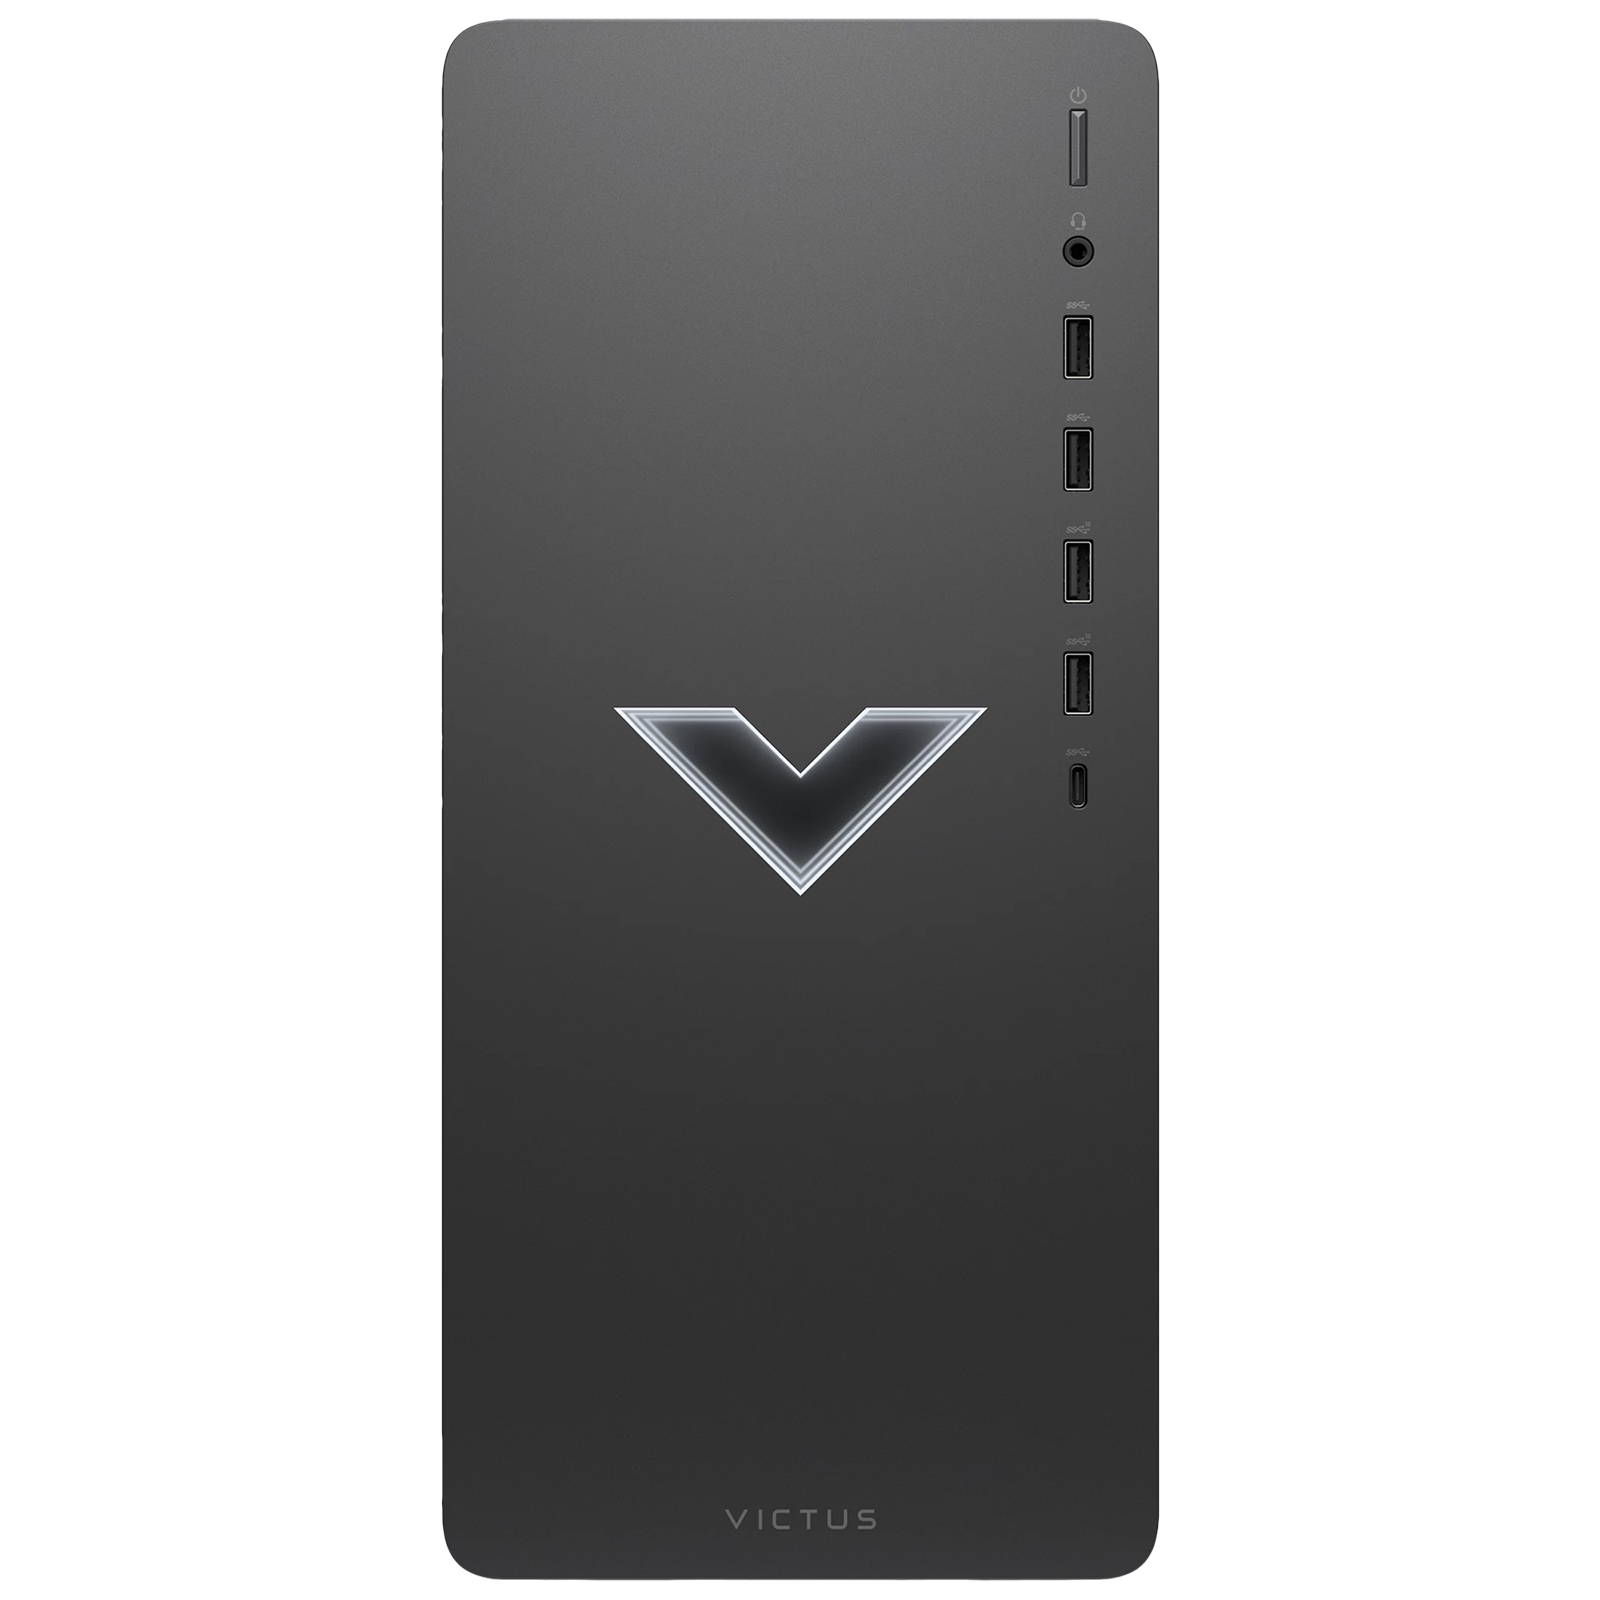 HP Victus TG02-0007in Core i7 Tower PC (16GB, 1TB SSD, NVIDIA GeForce RTX 3060, Windows 11 Home, Mica Silver)